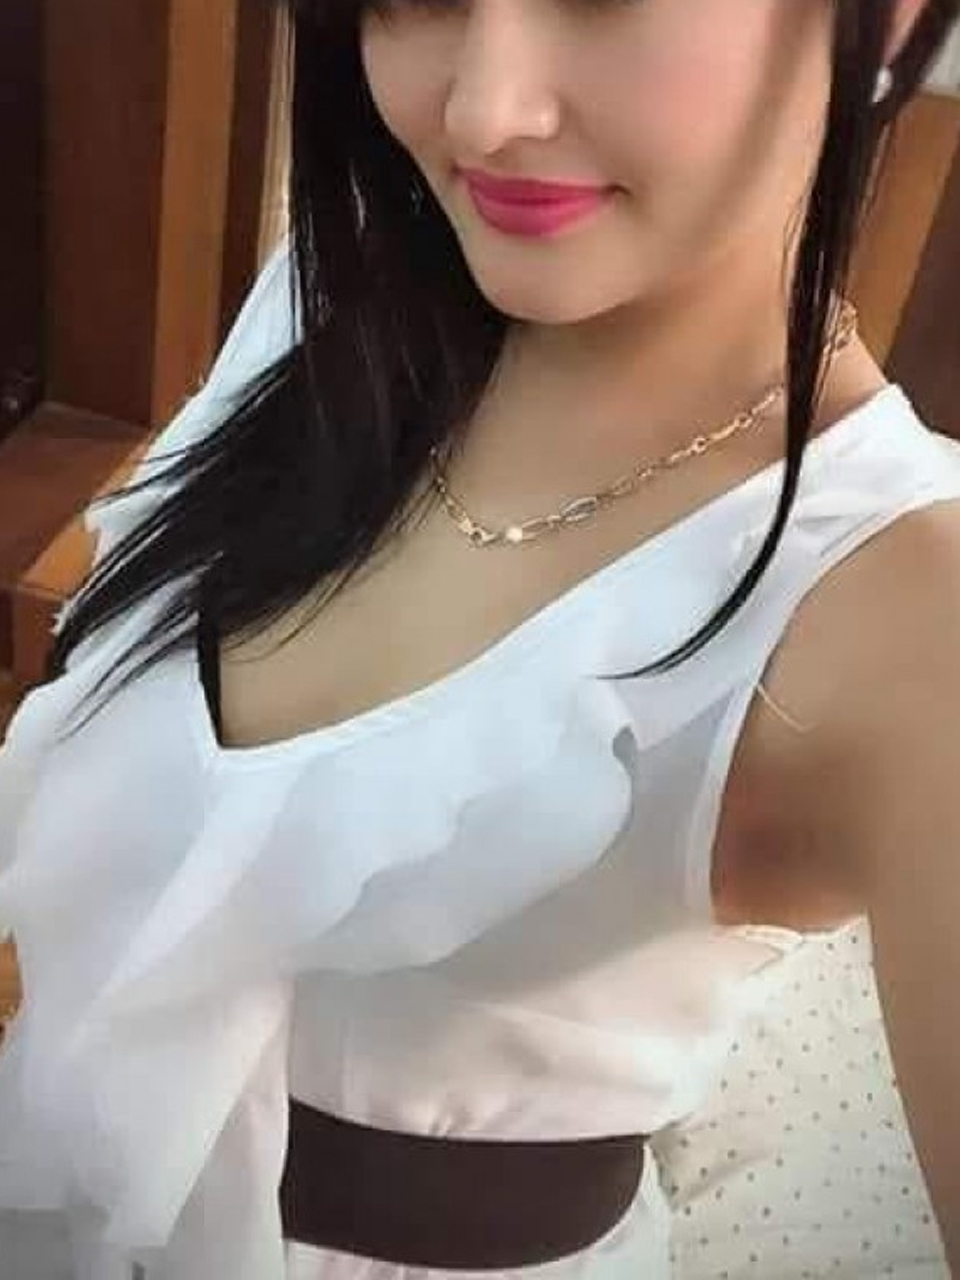 Call Girls Number in Gurgaon